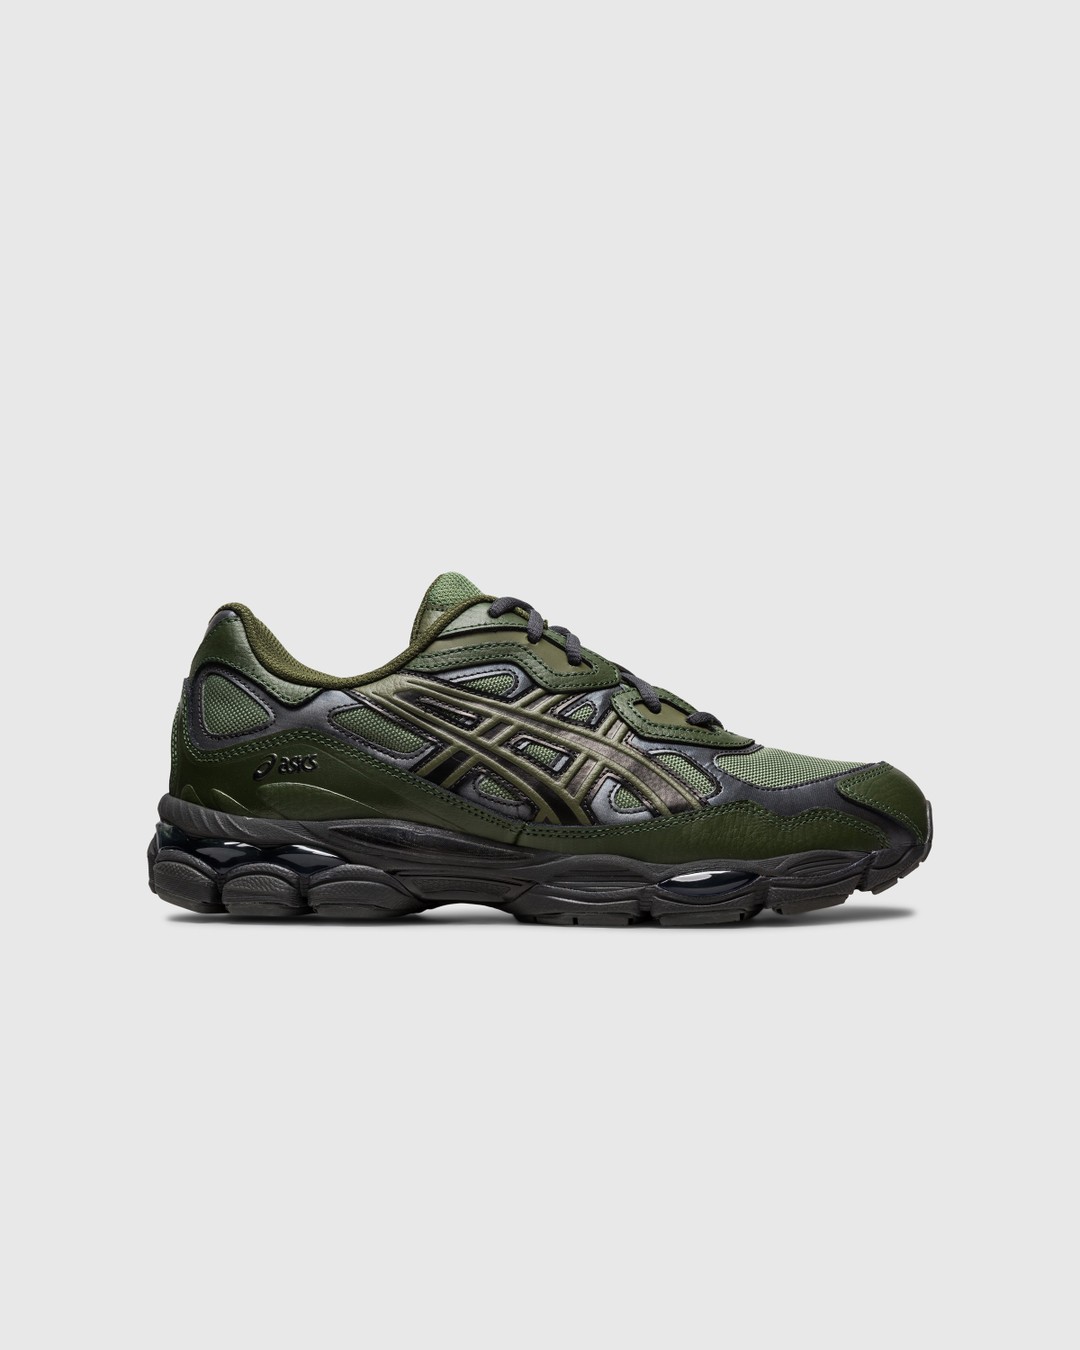 asics – GEL-NYC Moss/Forest - Sneakers - Green - Image 1